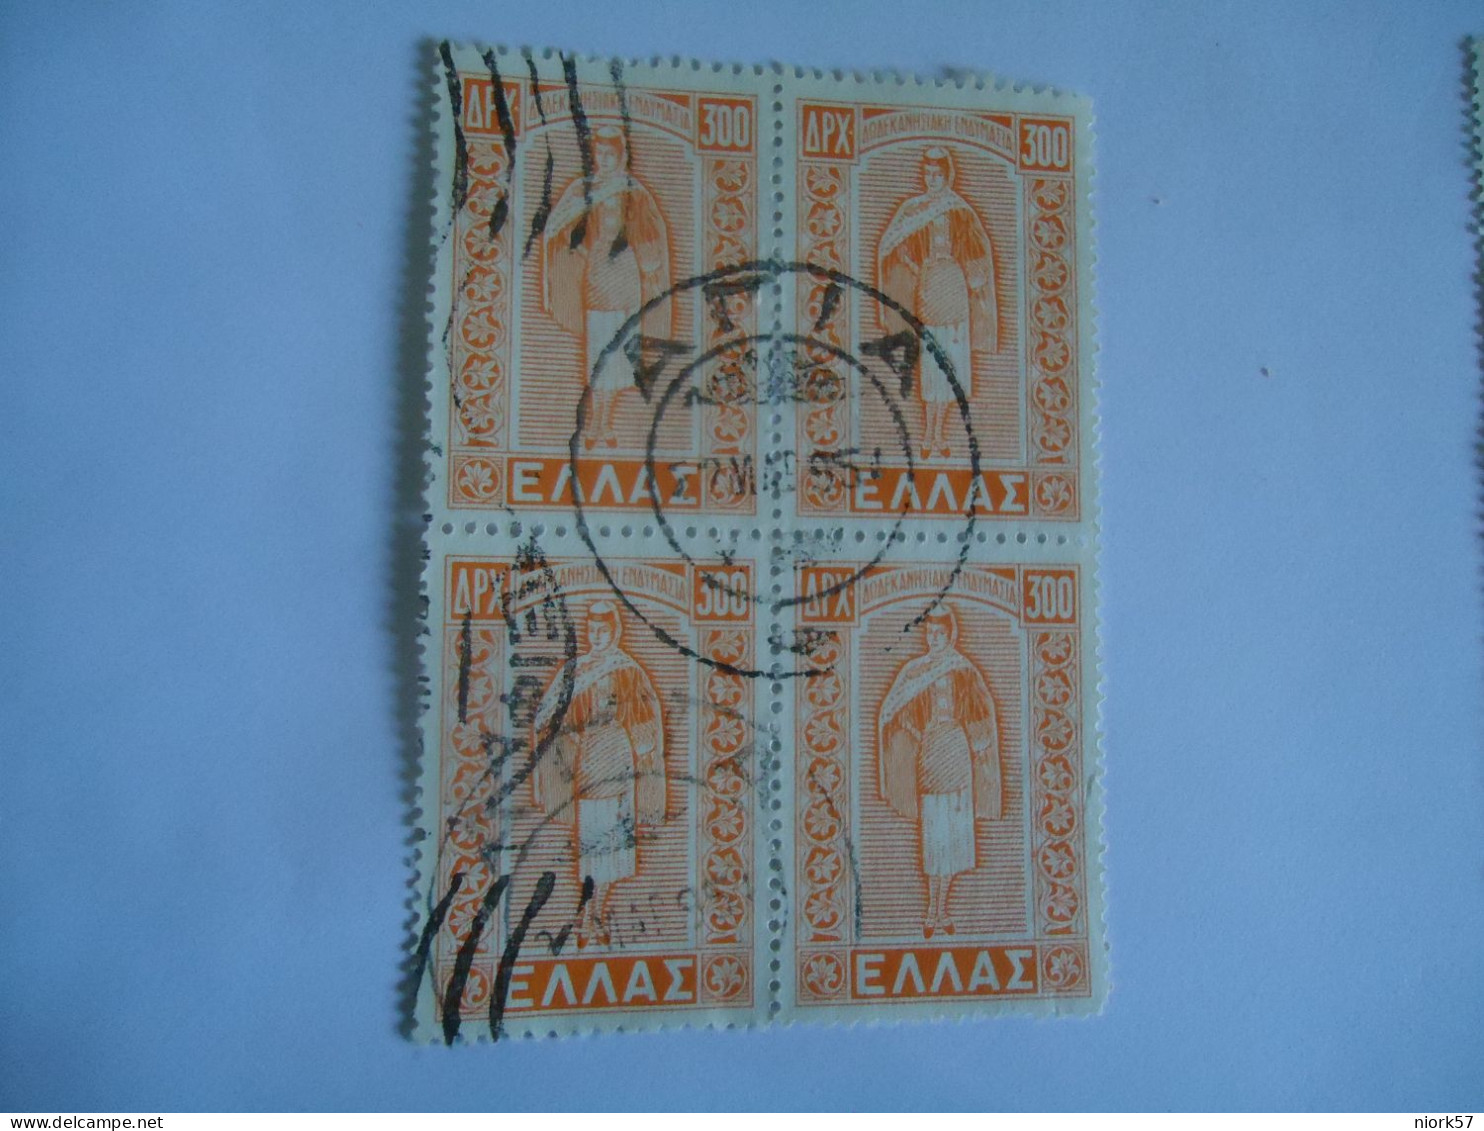 GREECE USED STAMPS 1947 ISLAND UNIONS   BLOCK OF 4 POSTMARK  ΑΓΙΑ - Used Stamps